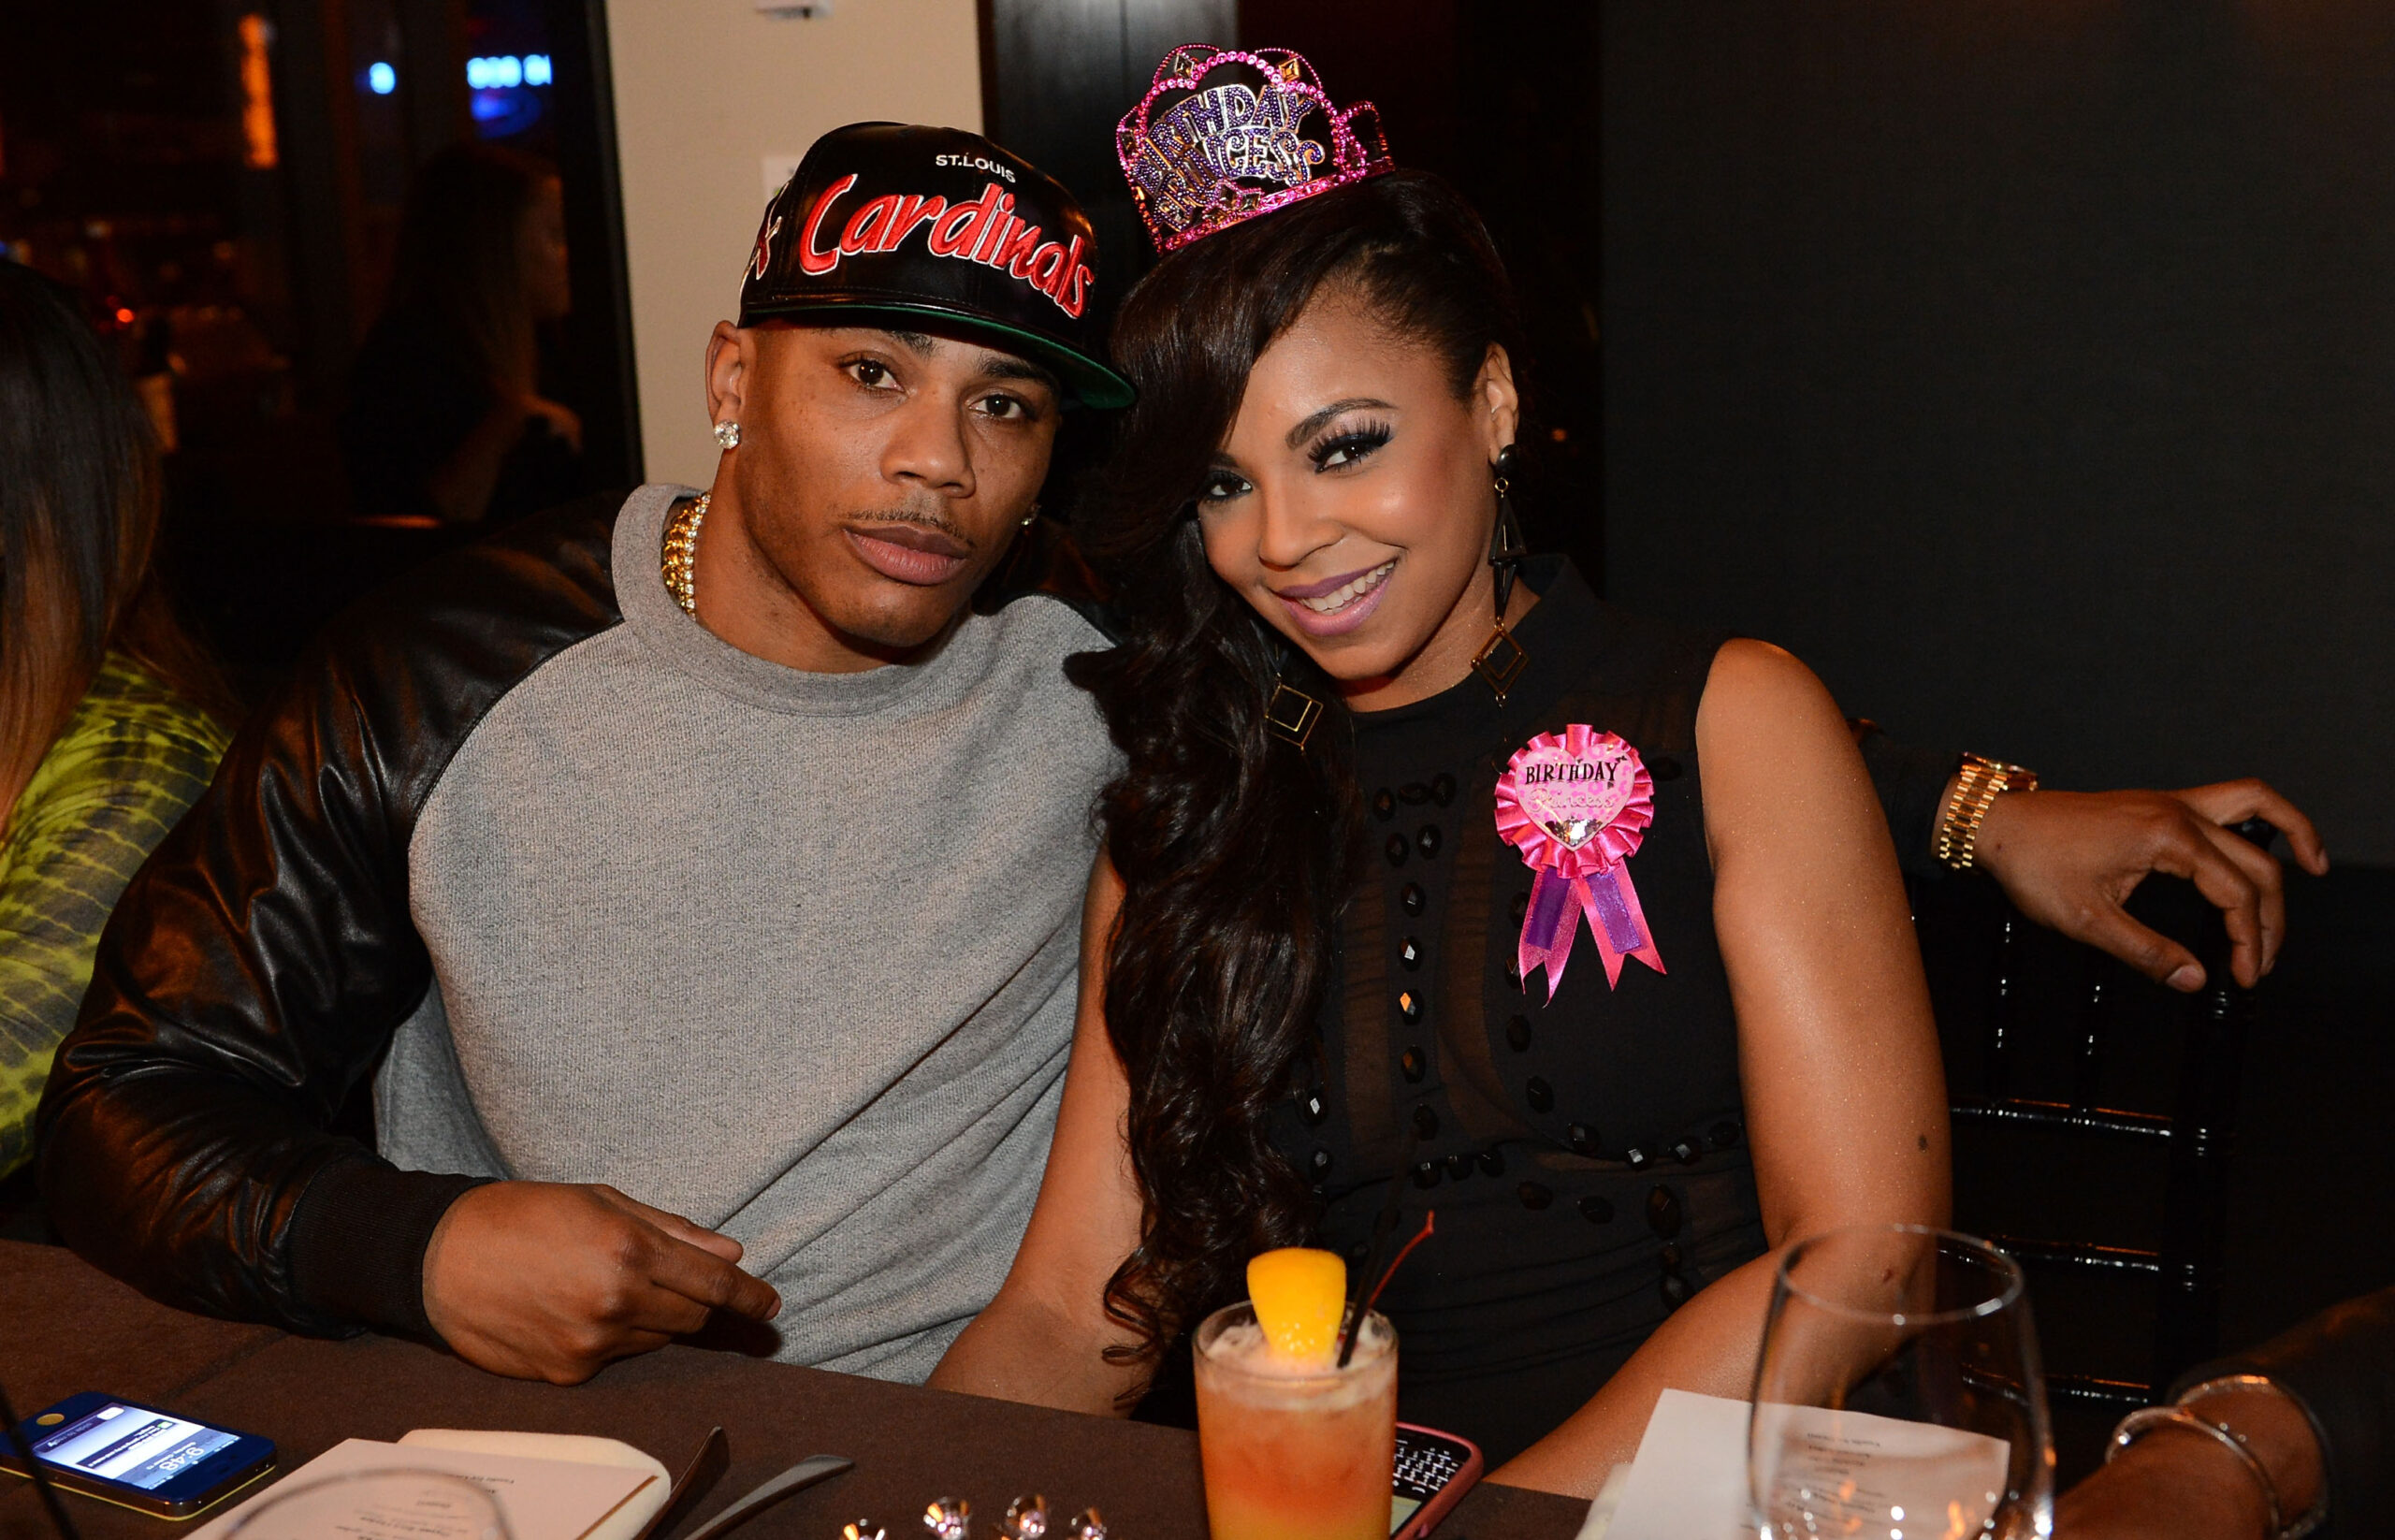 Ashanti & Nelly Rock Luxurious Matching Outfits For Annual QC Music